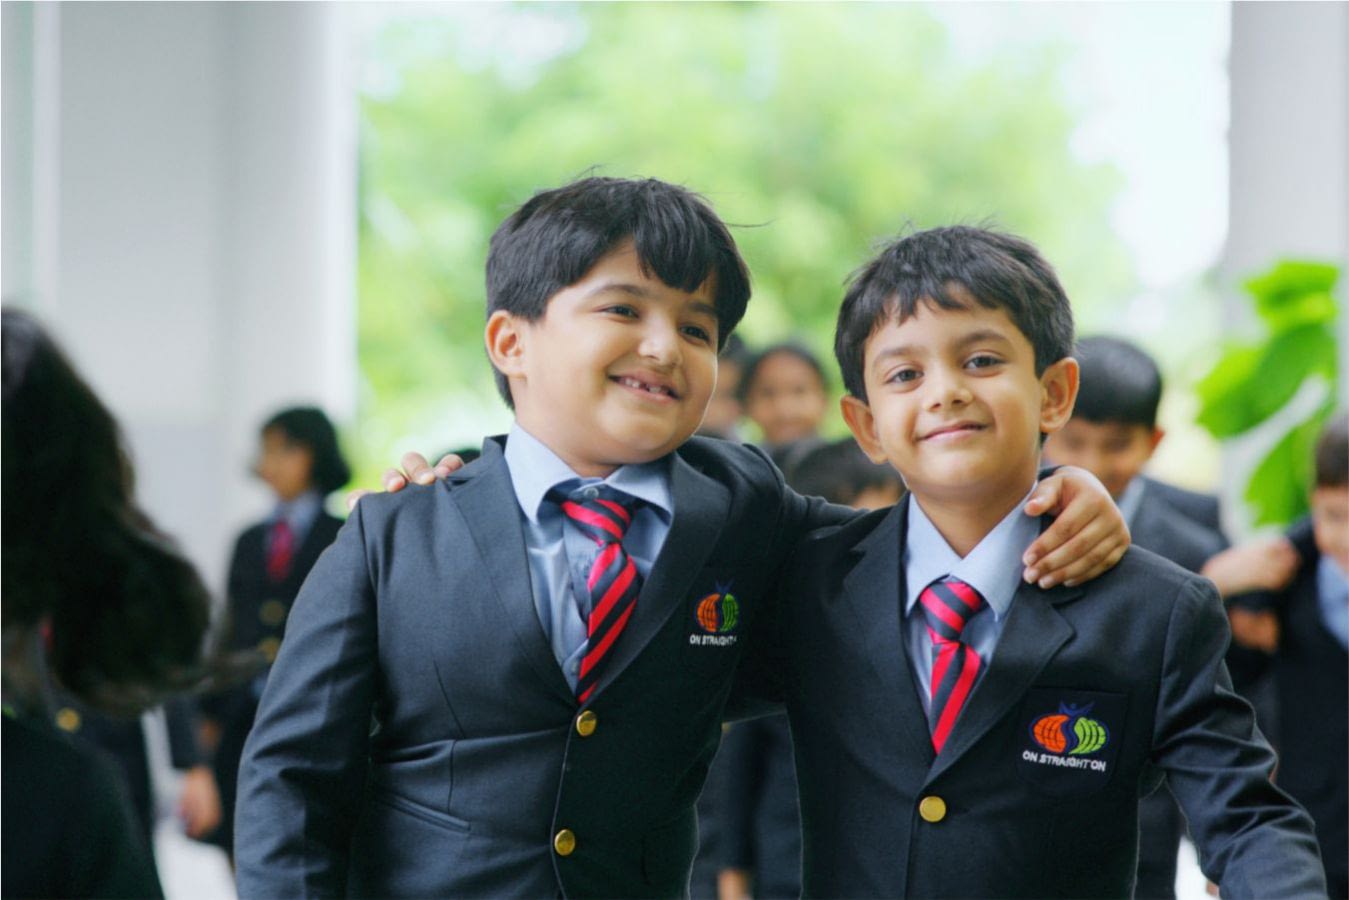 Cambridge Assessment International Education in India.jpg SSVM World School provides excellent education and best faculties who are highly expertise in their respective fields. Visit the website and find complete details there! https://ssvmwscambridge.com/ by ssvmwscambridge